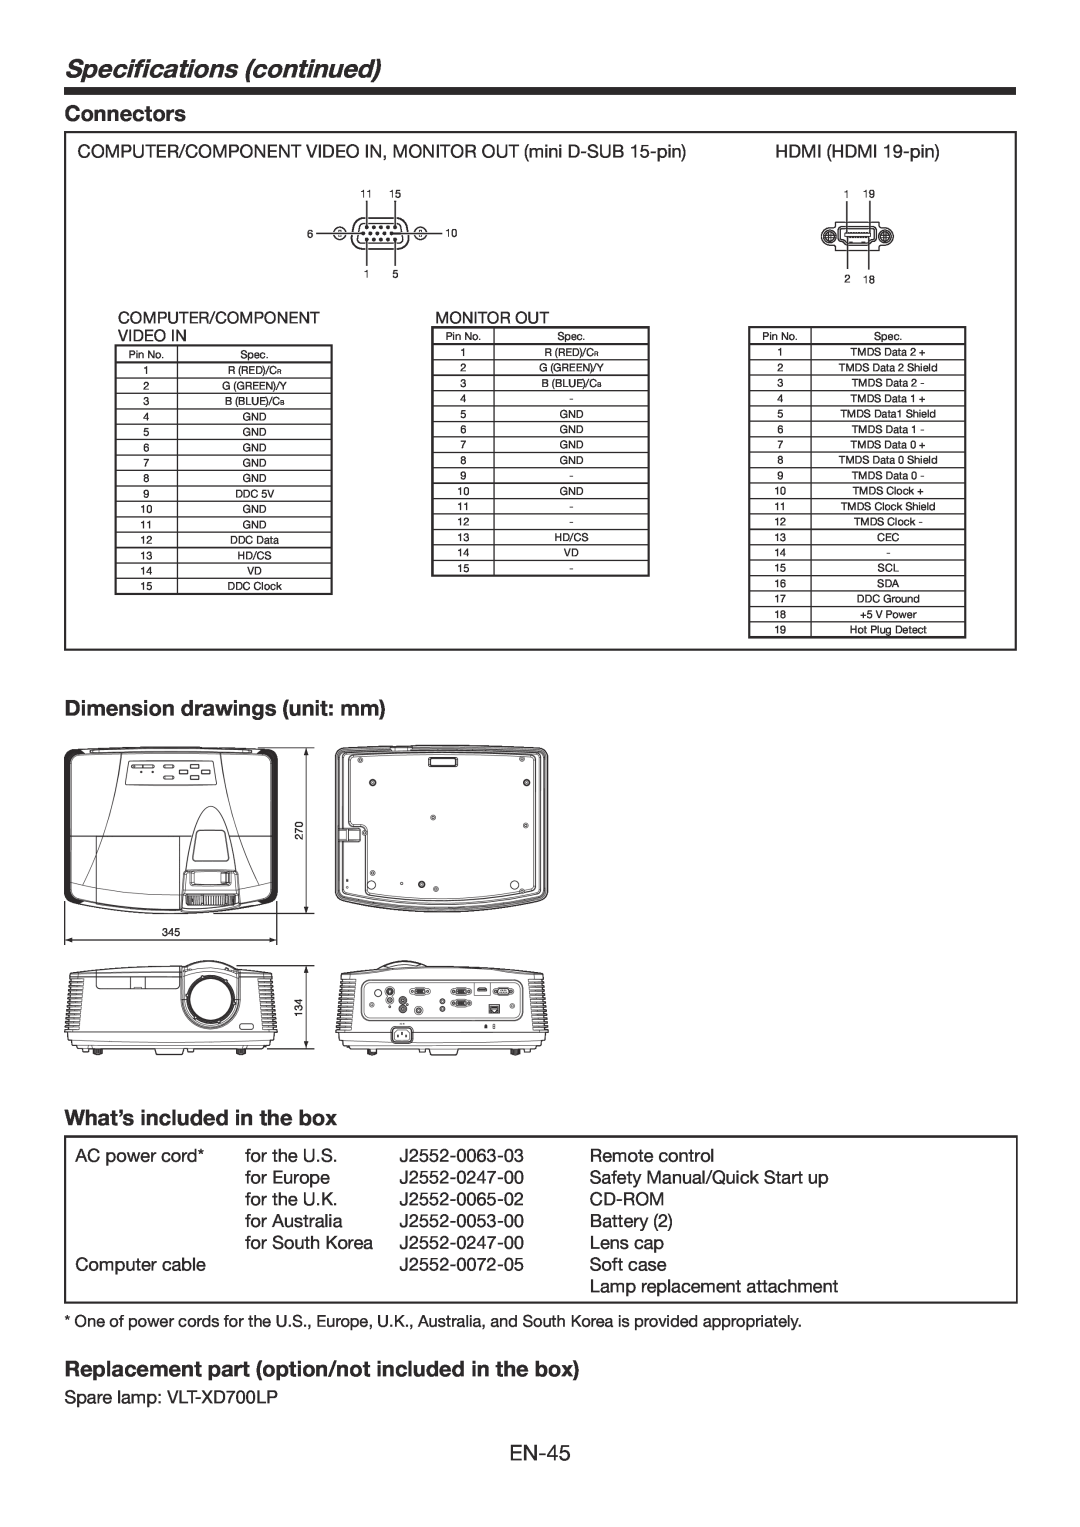 Mitsubishi Electronics FD730U Specifications continued, Connectors, Dimension drawings unit mm, What’s included in the box 